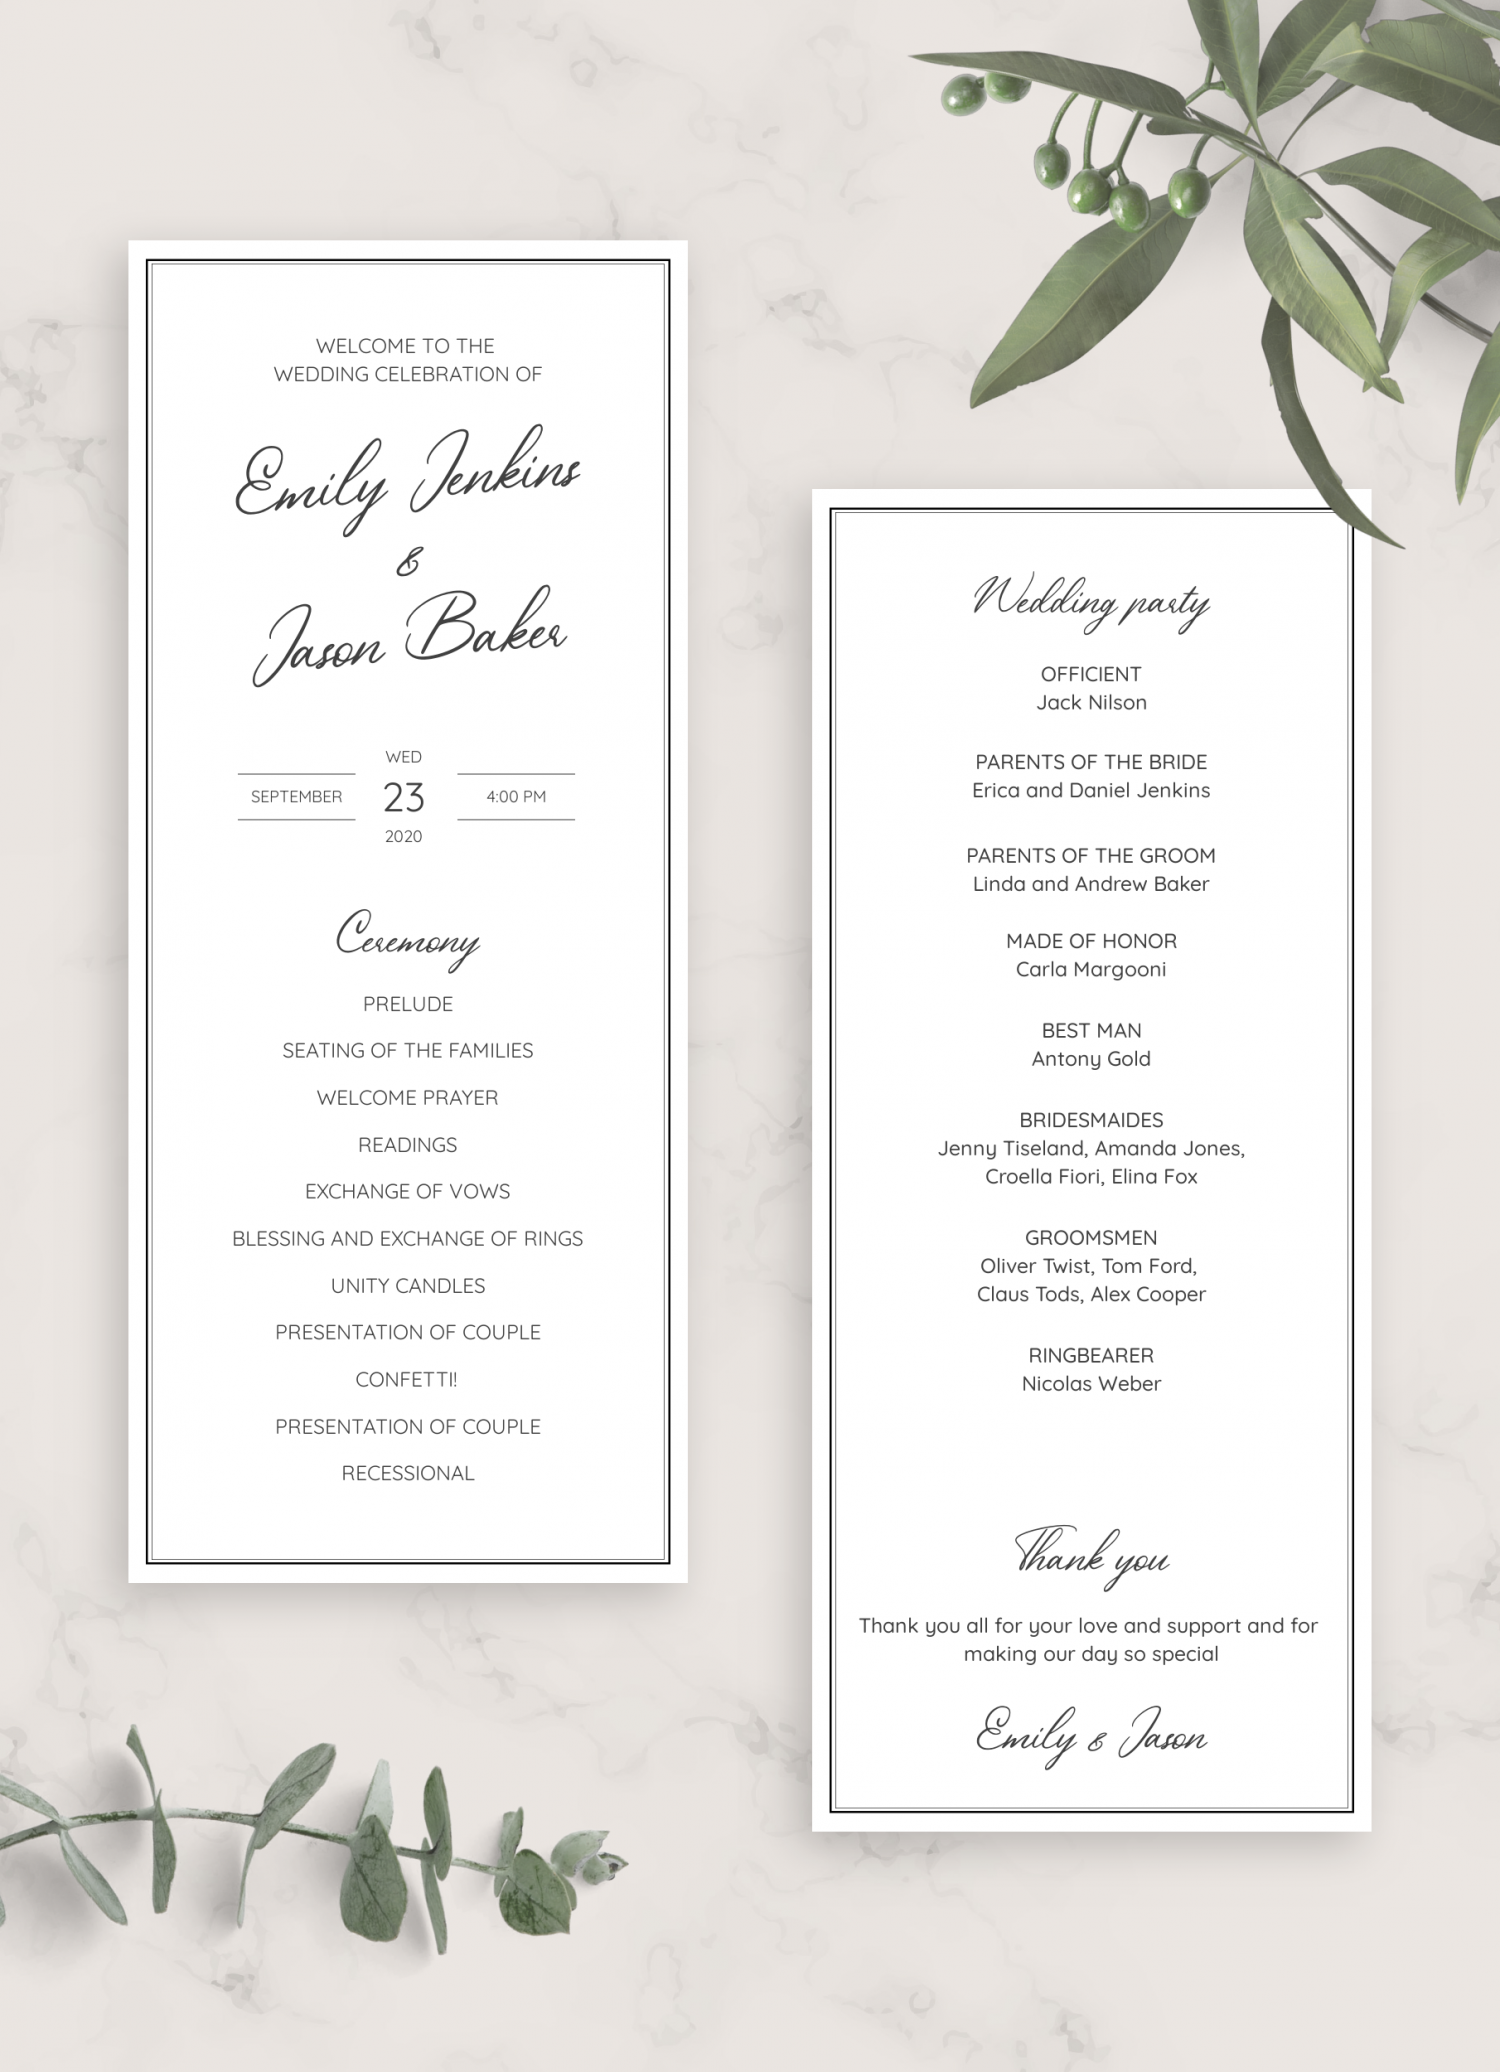 Free Downloadable Wedding Program Template That Can Be Printed